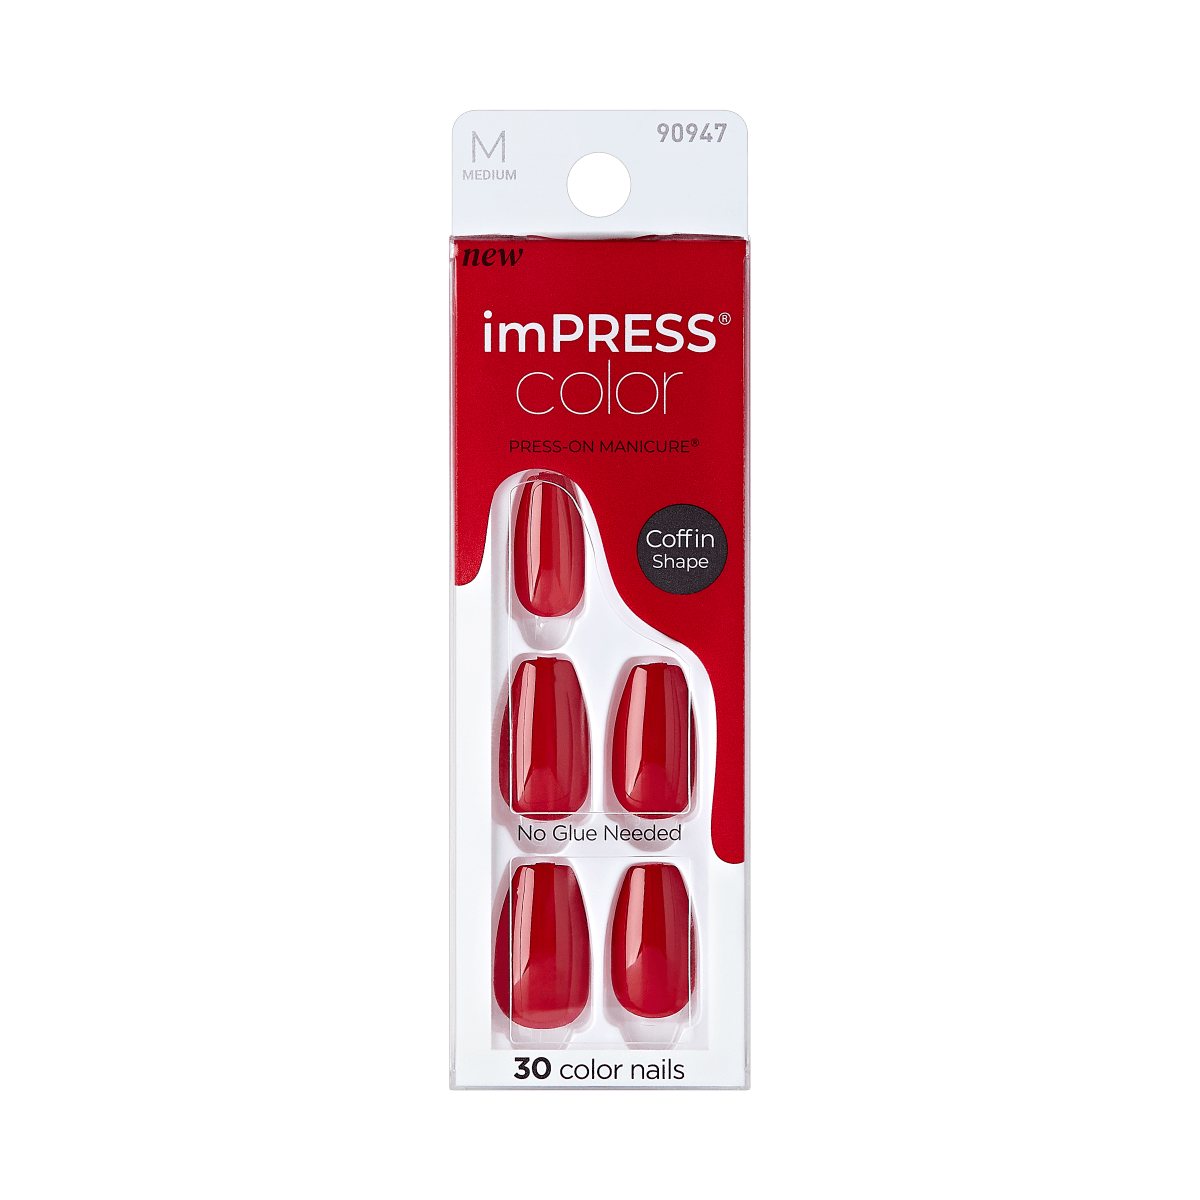 imPRESS Color Press-On Nails, No Glue Needed, Red, Medium Coffin, 33 Ct ...